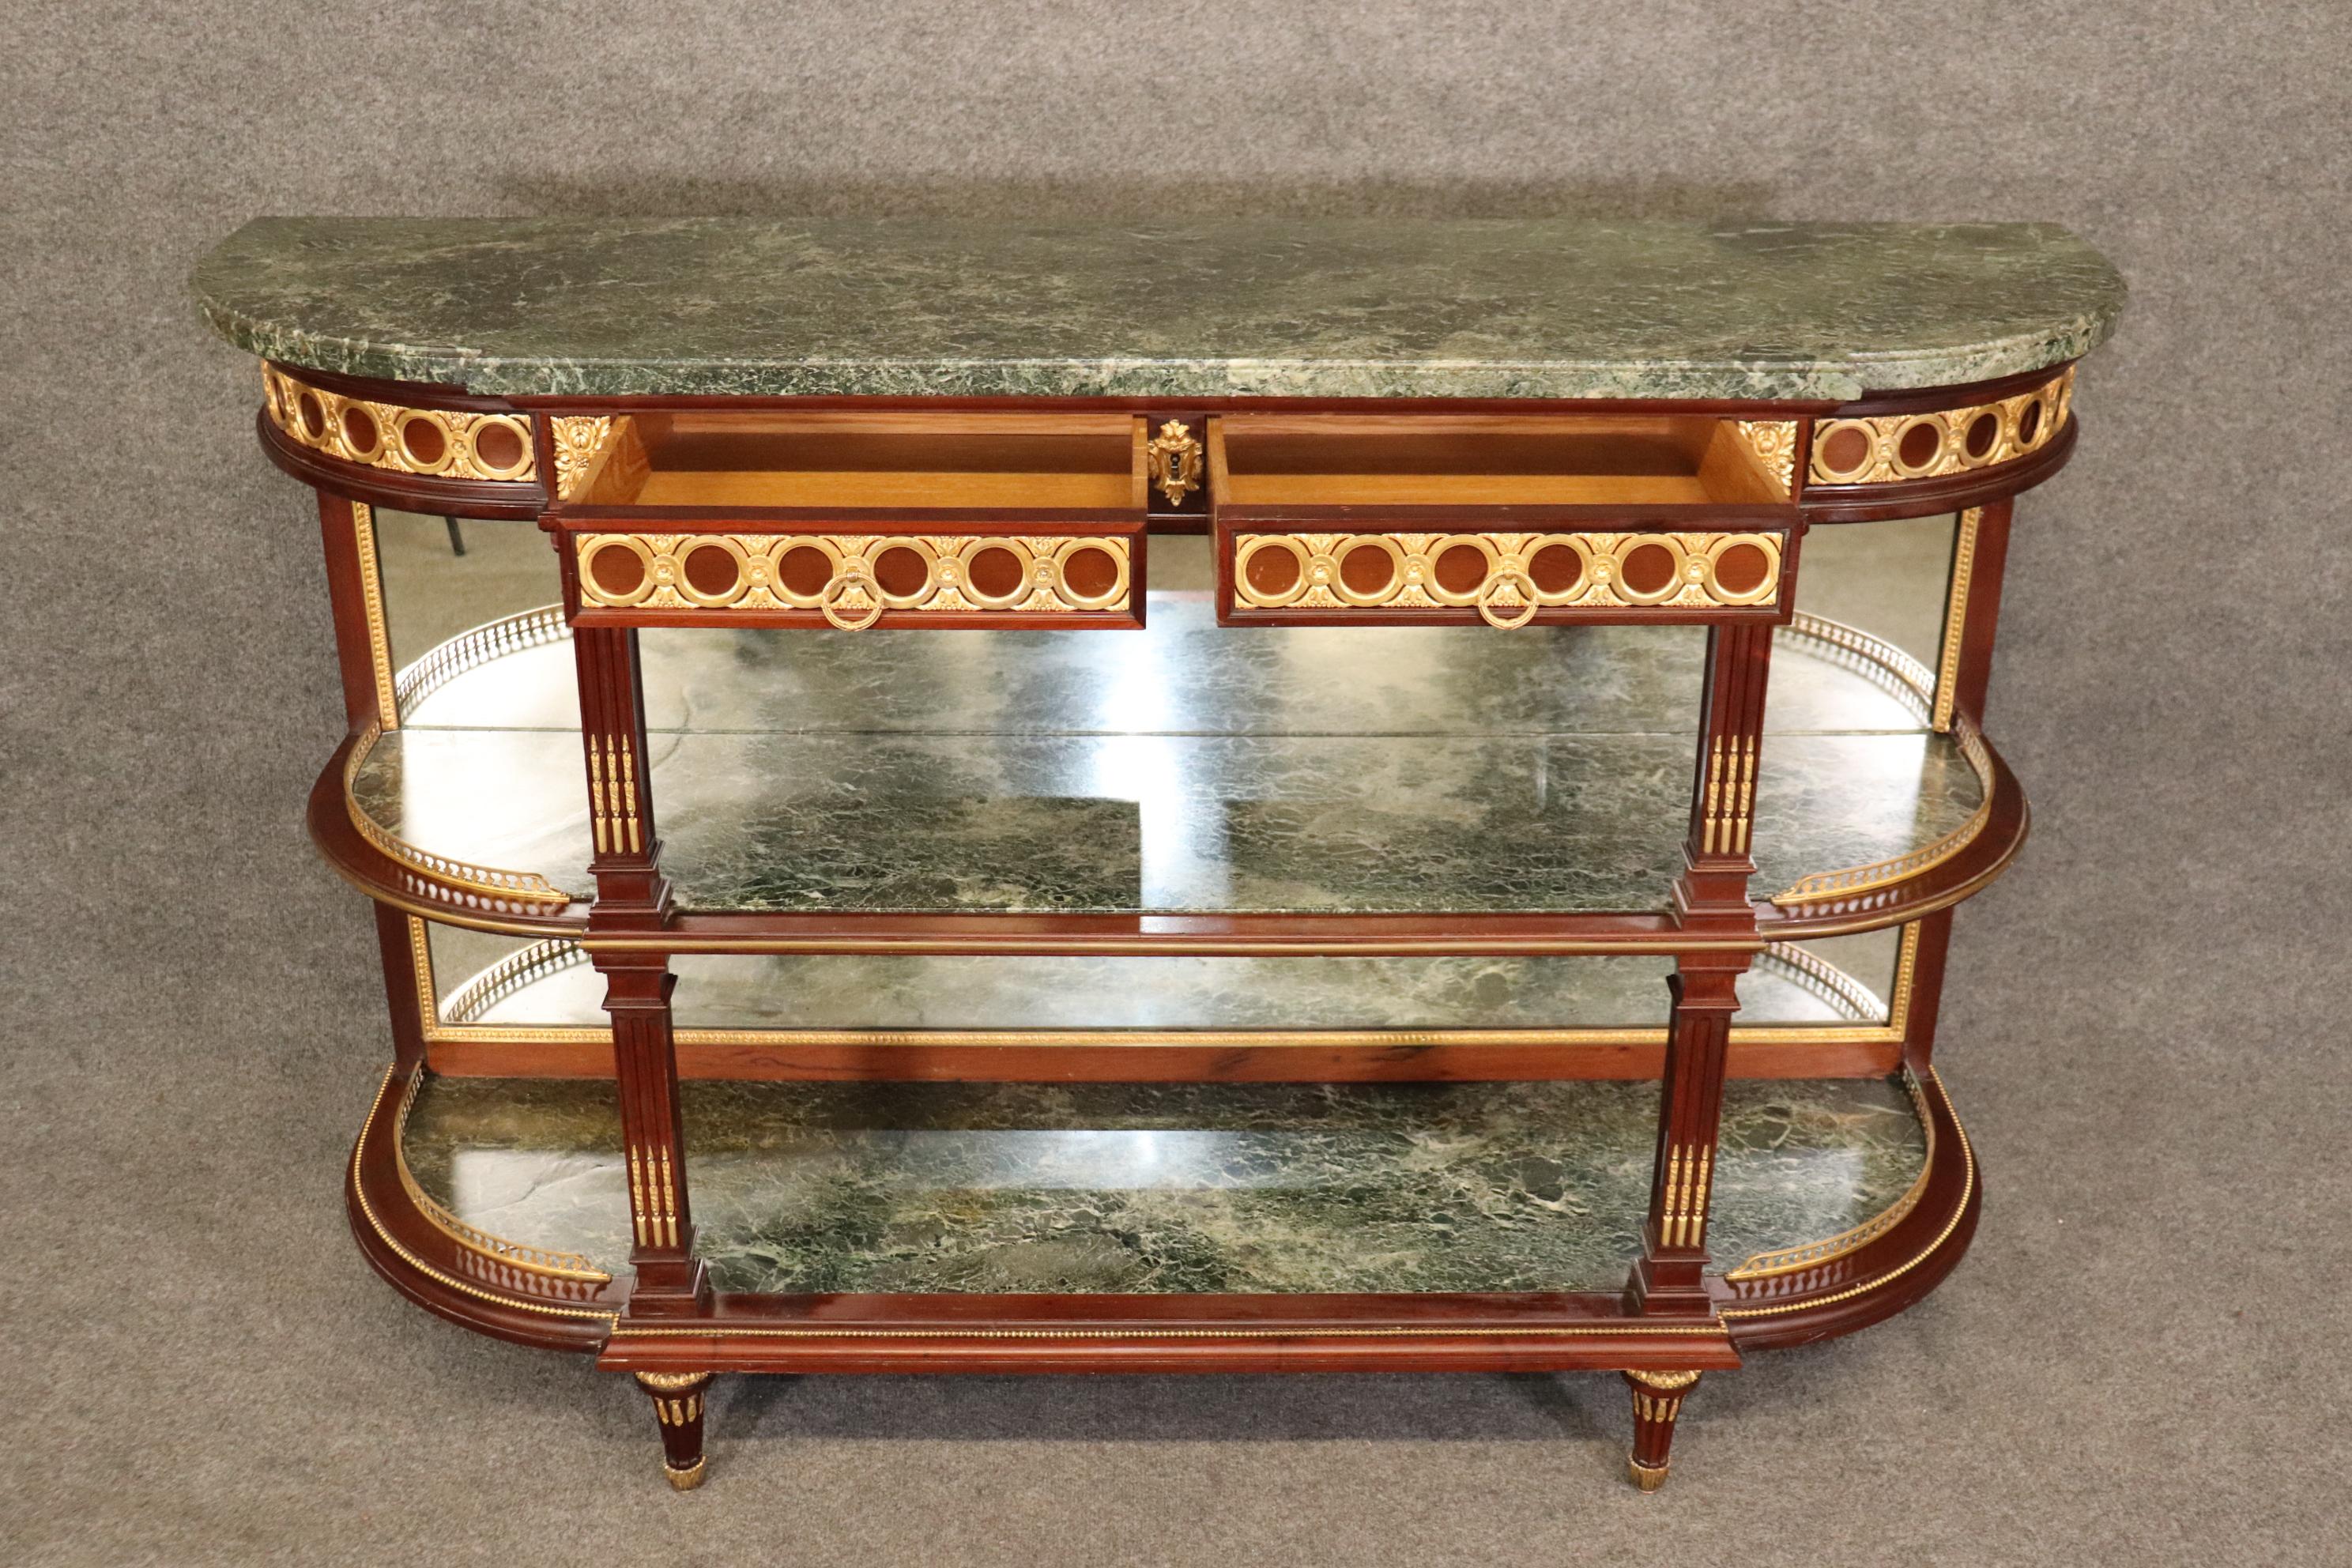 Fantastic French Louis XVI Marble Gold Dore' Bronze Mounted Sideboard Server In Good Condition For Sale In Swedesboro, NJ